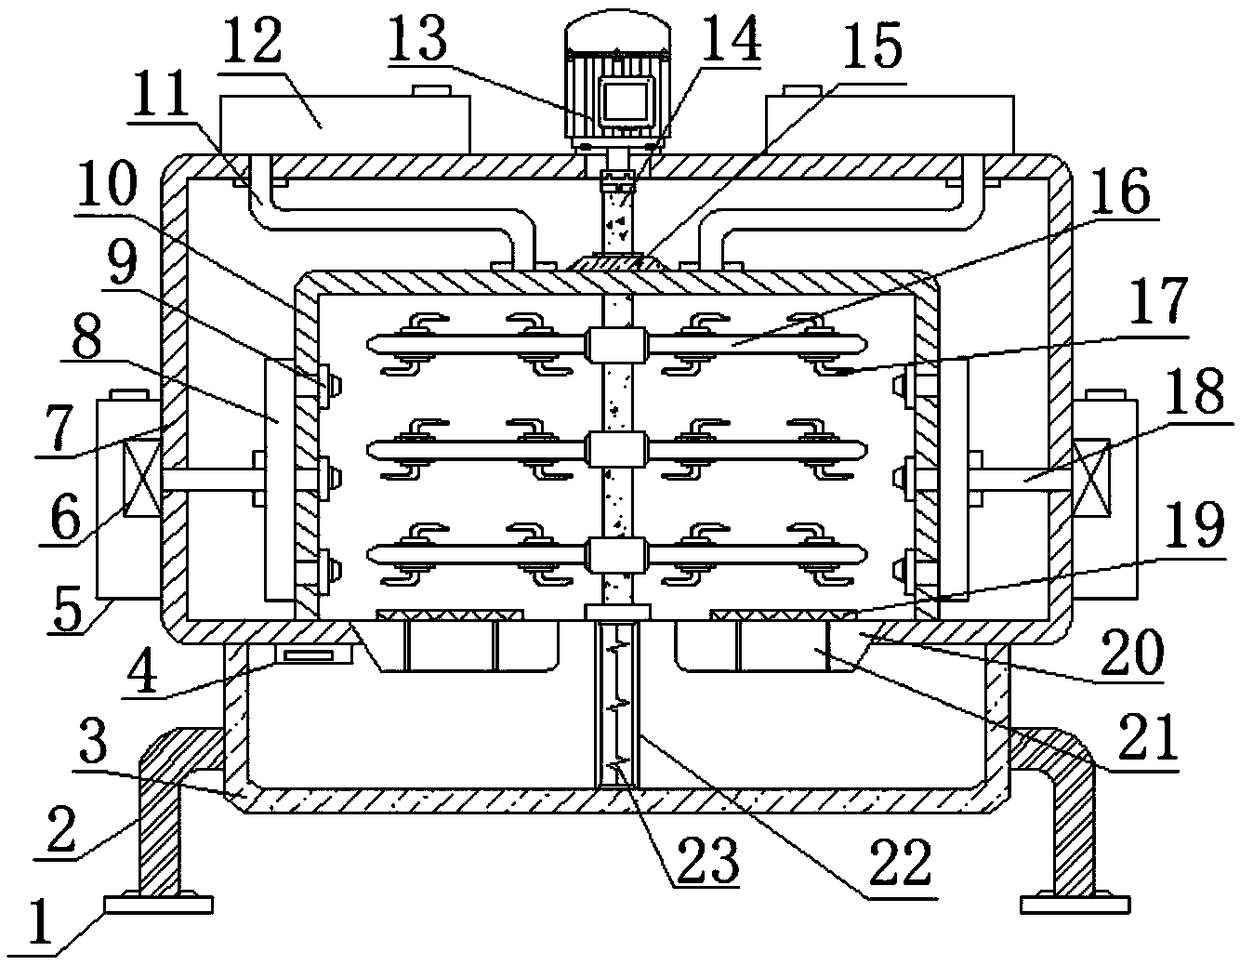 Fermentation compositing device for agricultural straw recycling